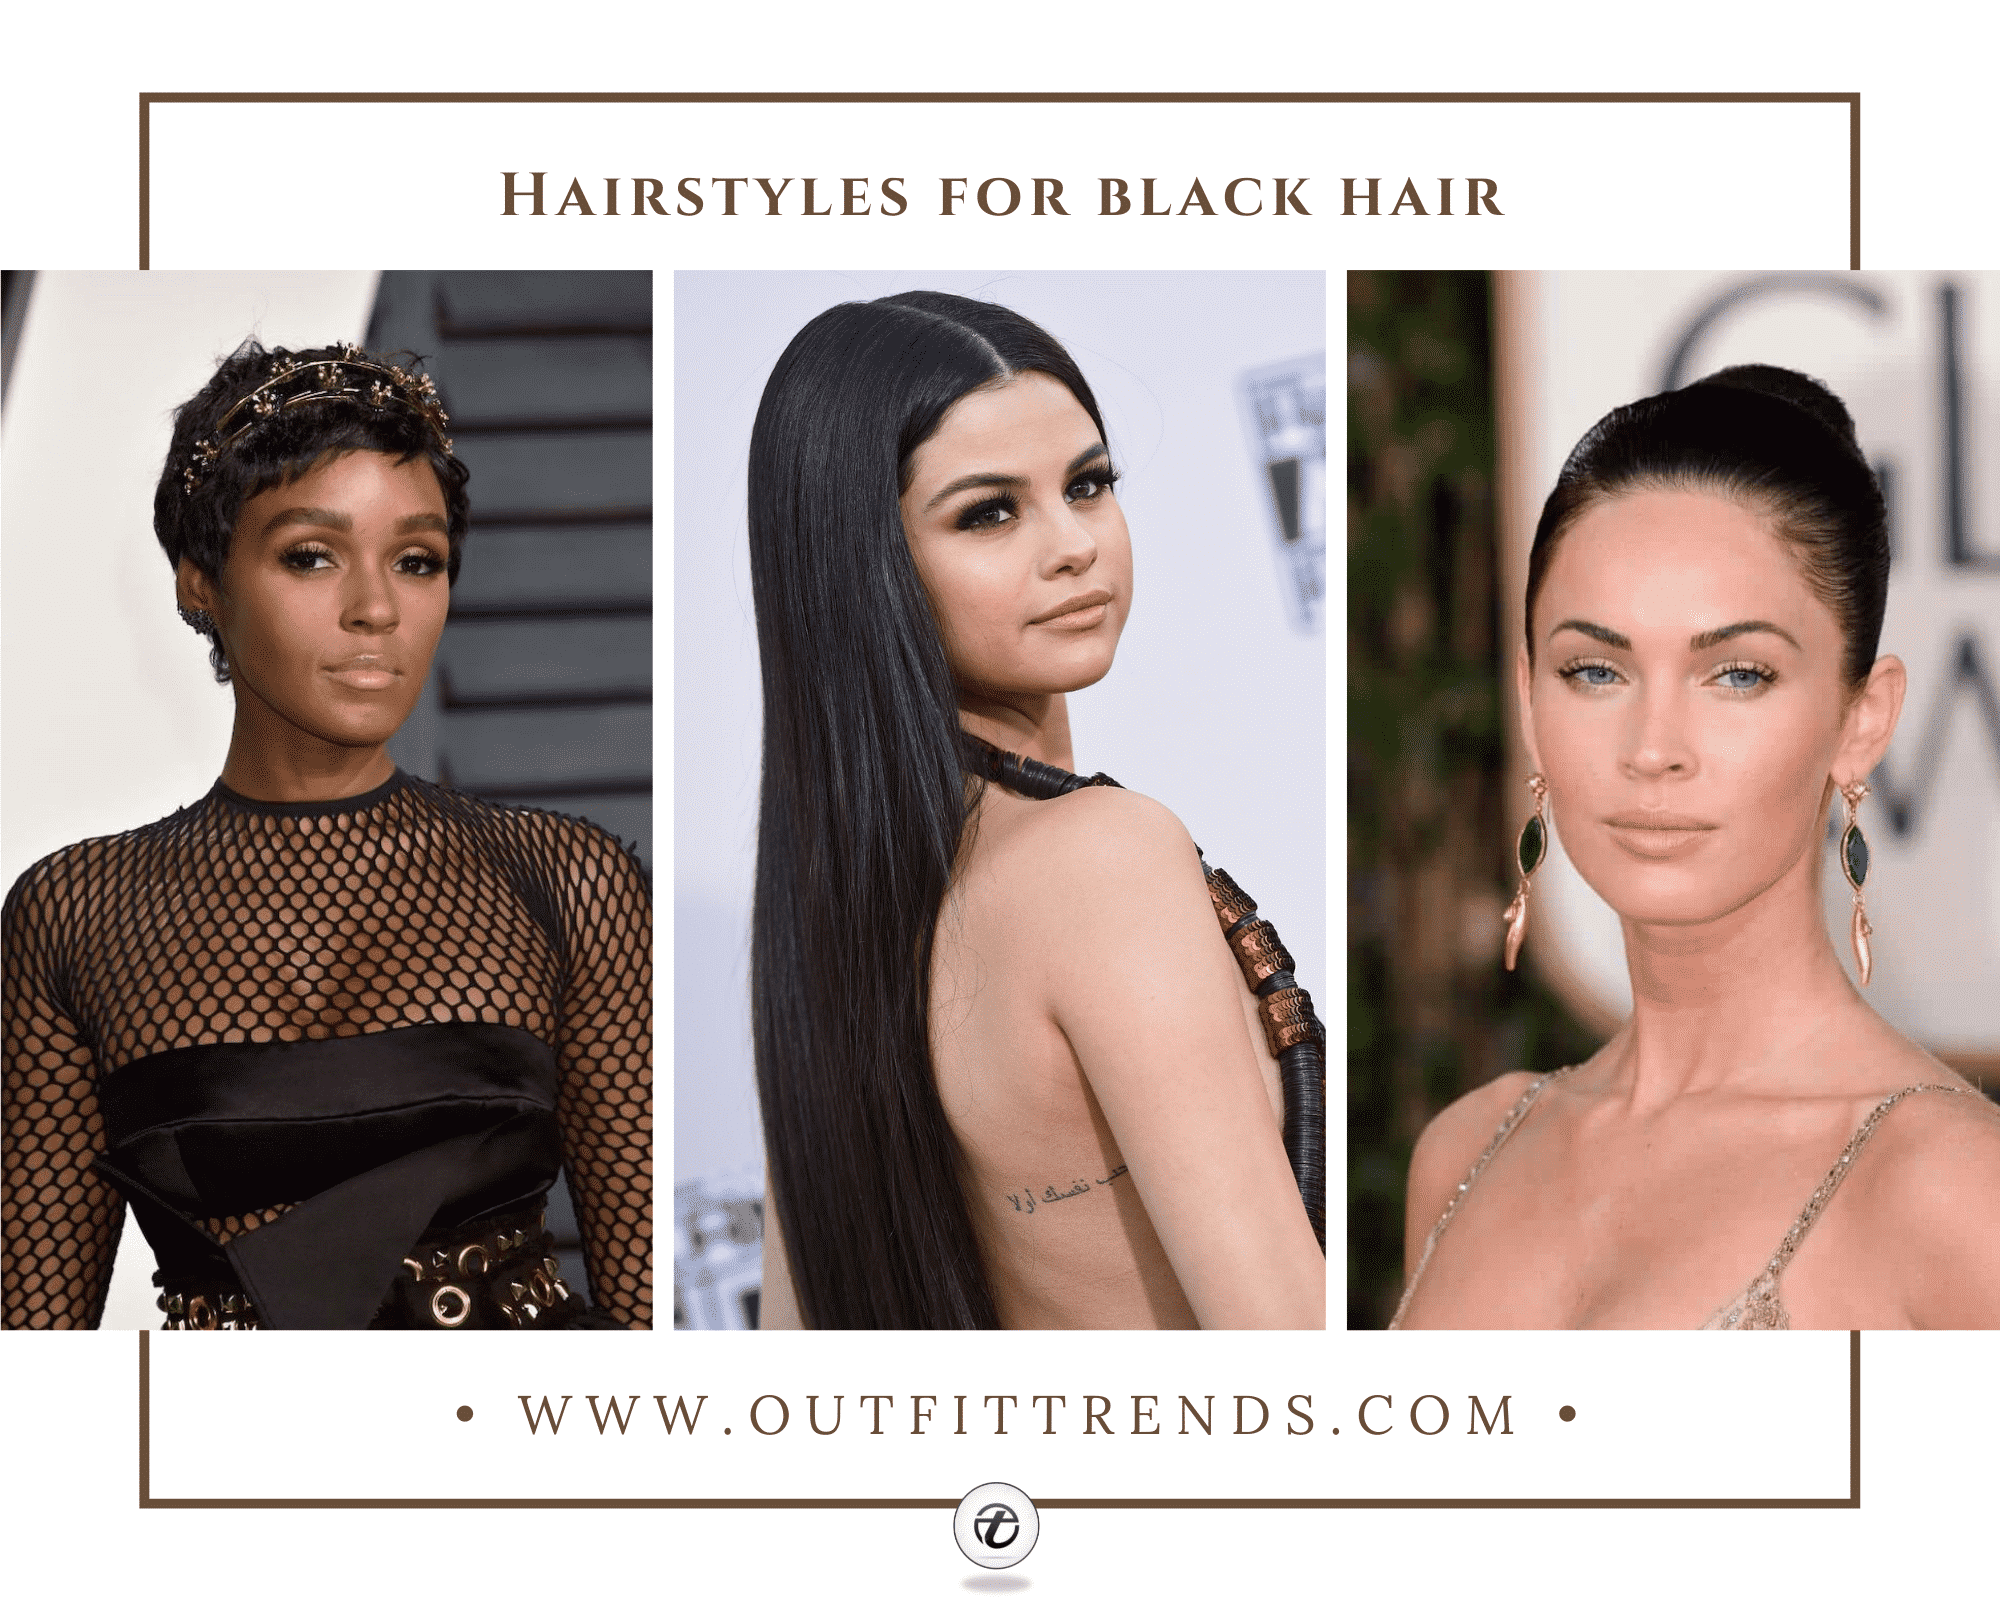 Effortless Hairstyles That Take No Time to Do  theFashionSpot